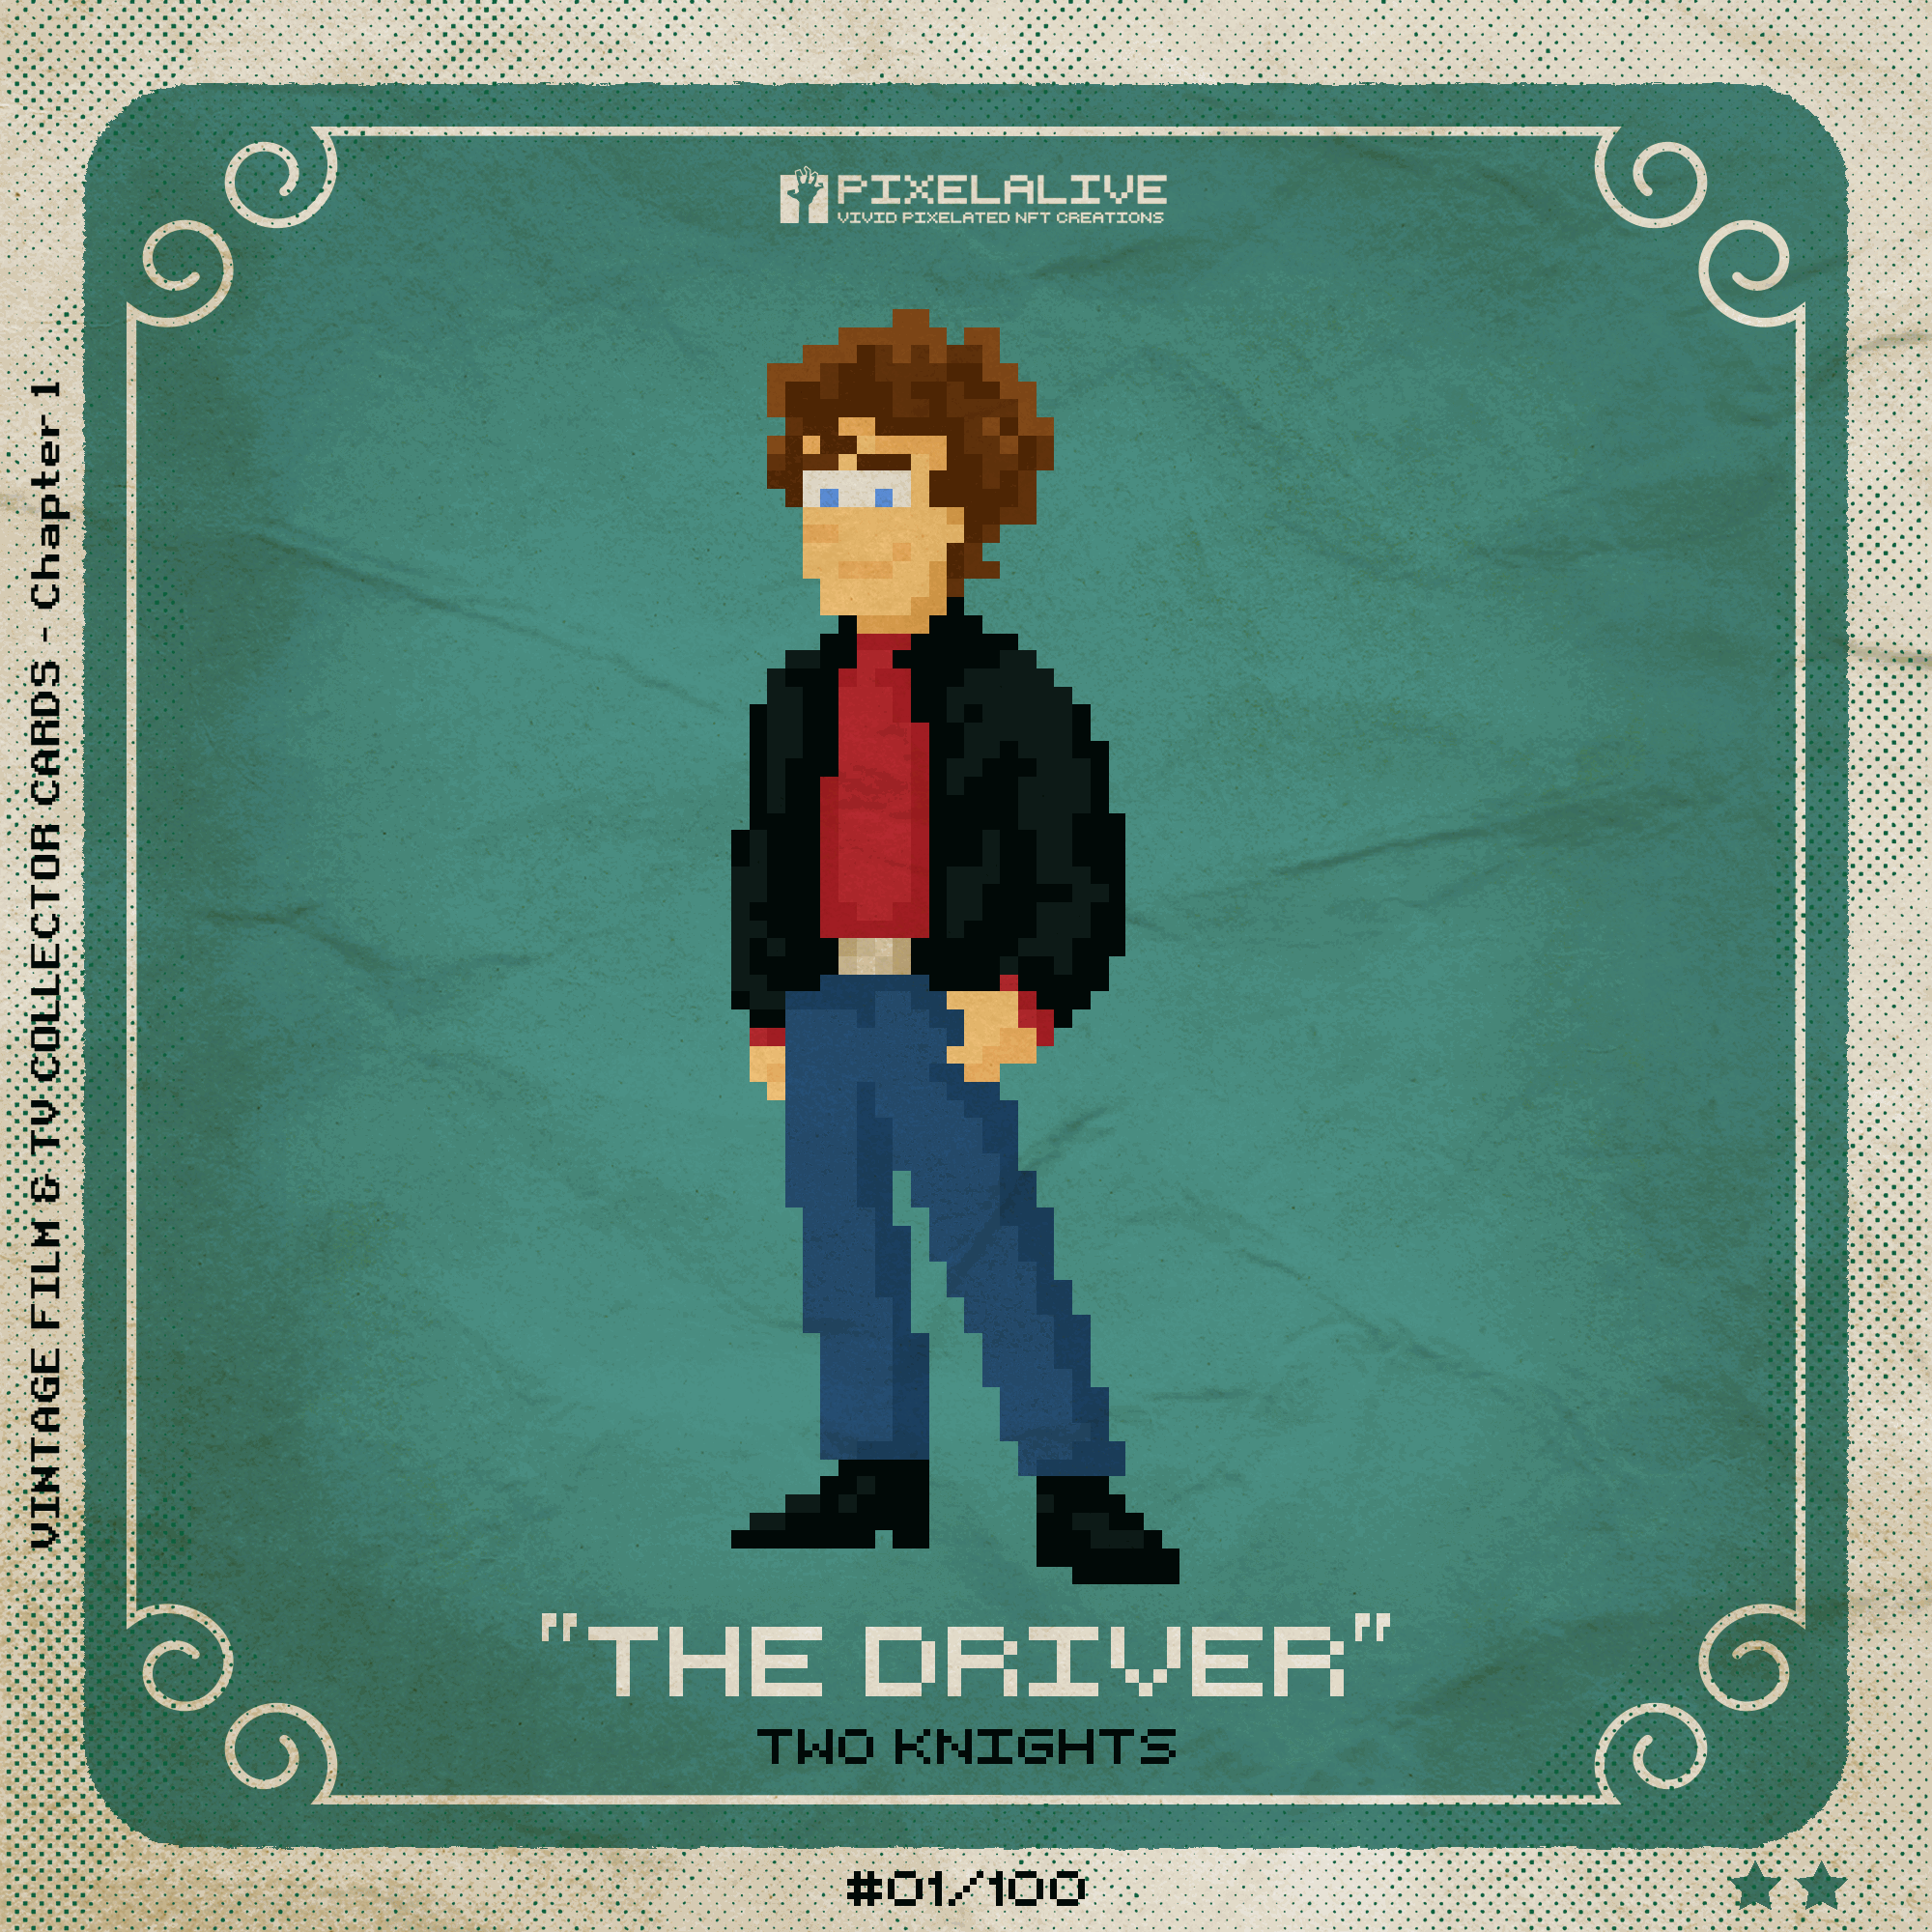 THE DRIVER #01/100